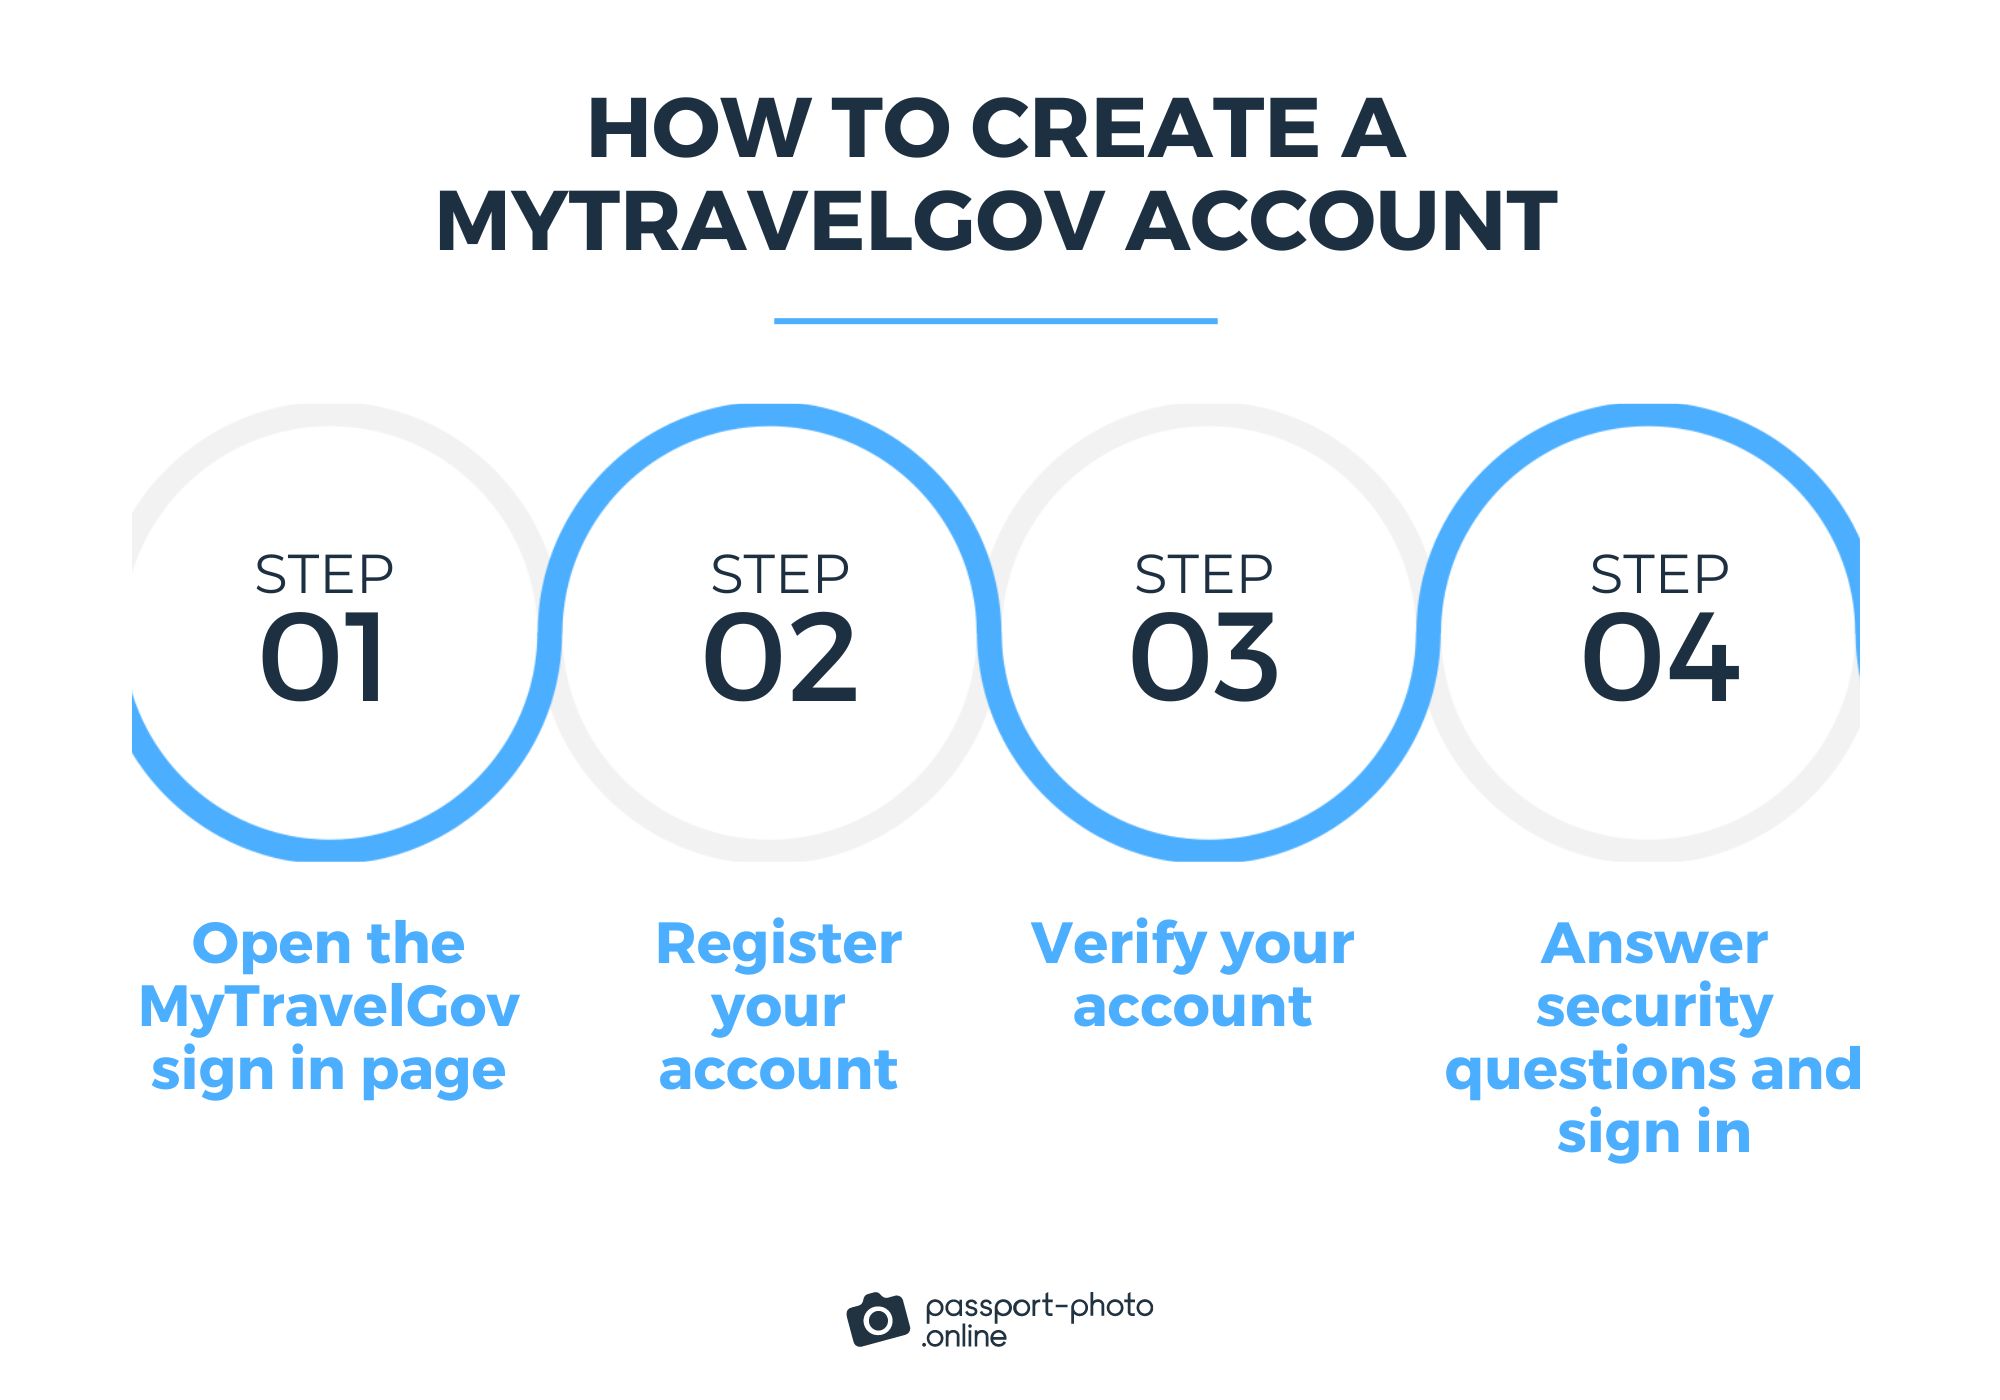 A blue and white infographic explaining the 4-step process of creating a MyTravelGov account.  